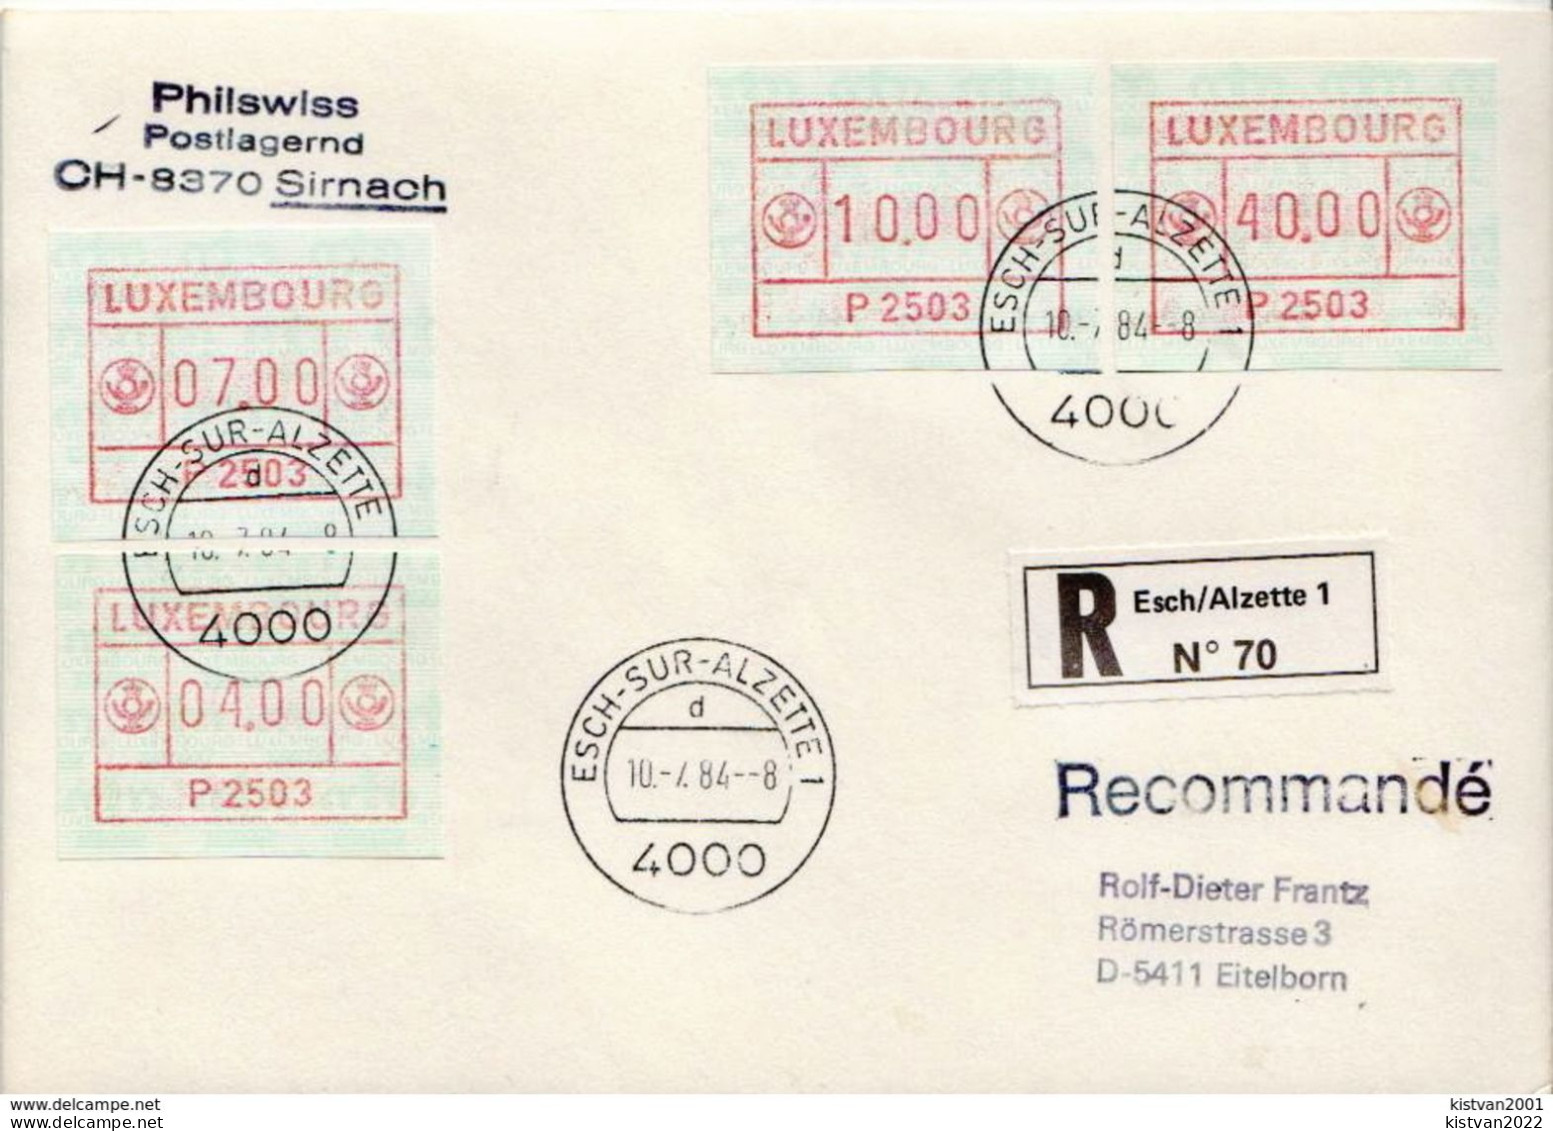 Postal History: Luxembourg R Cover With Automat Stamps - Maschinenstempel (EMA)